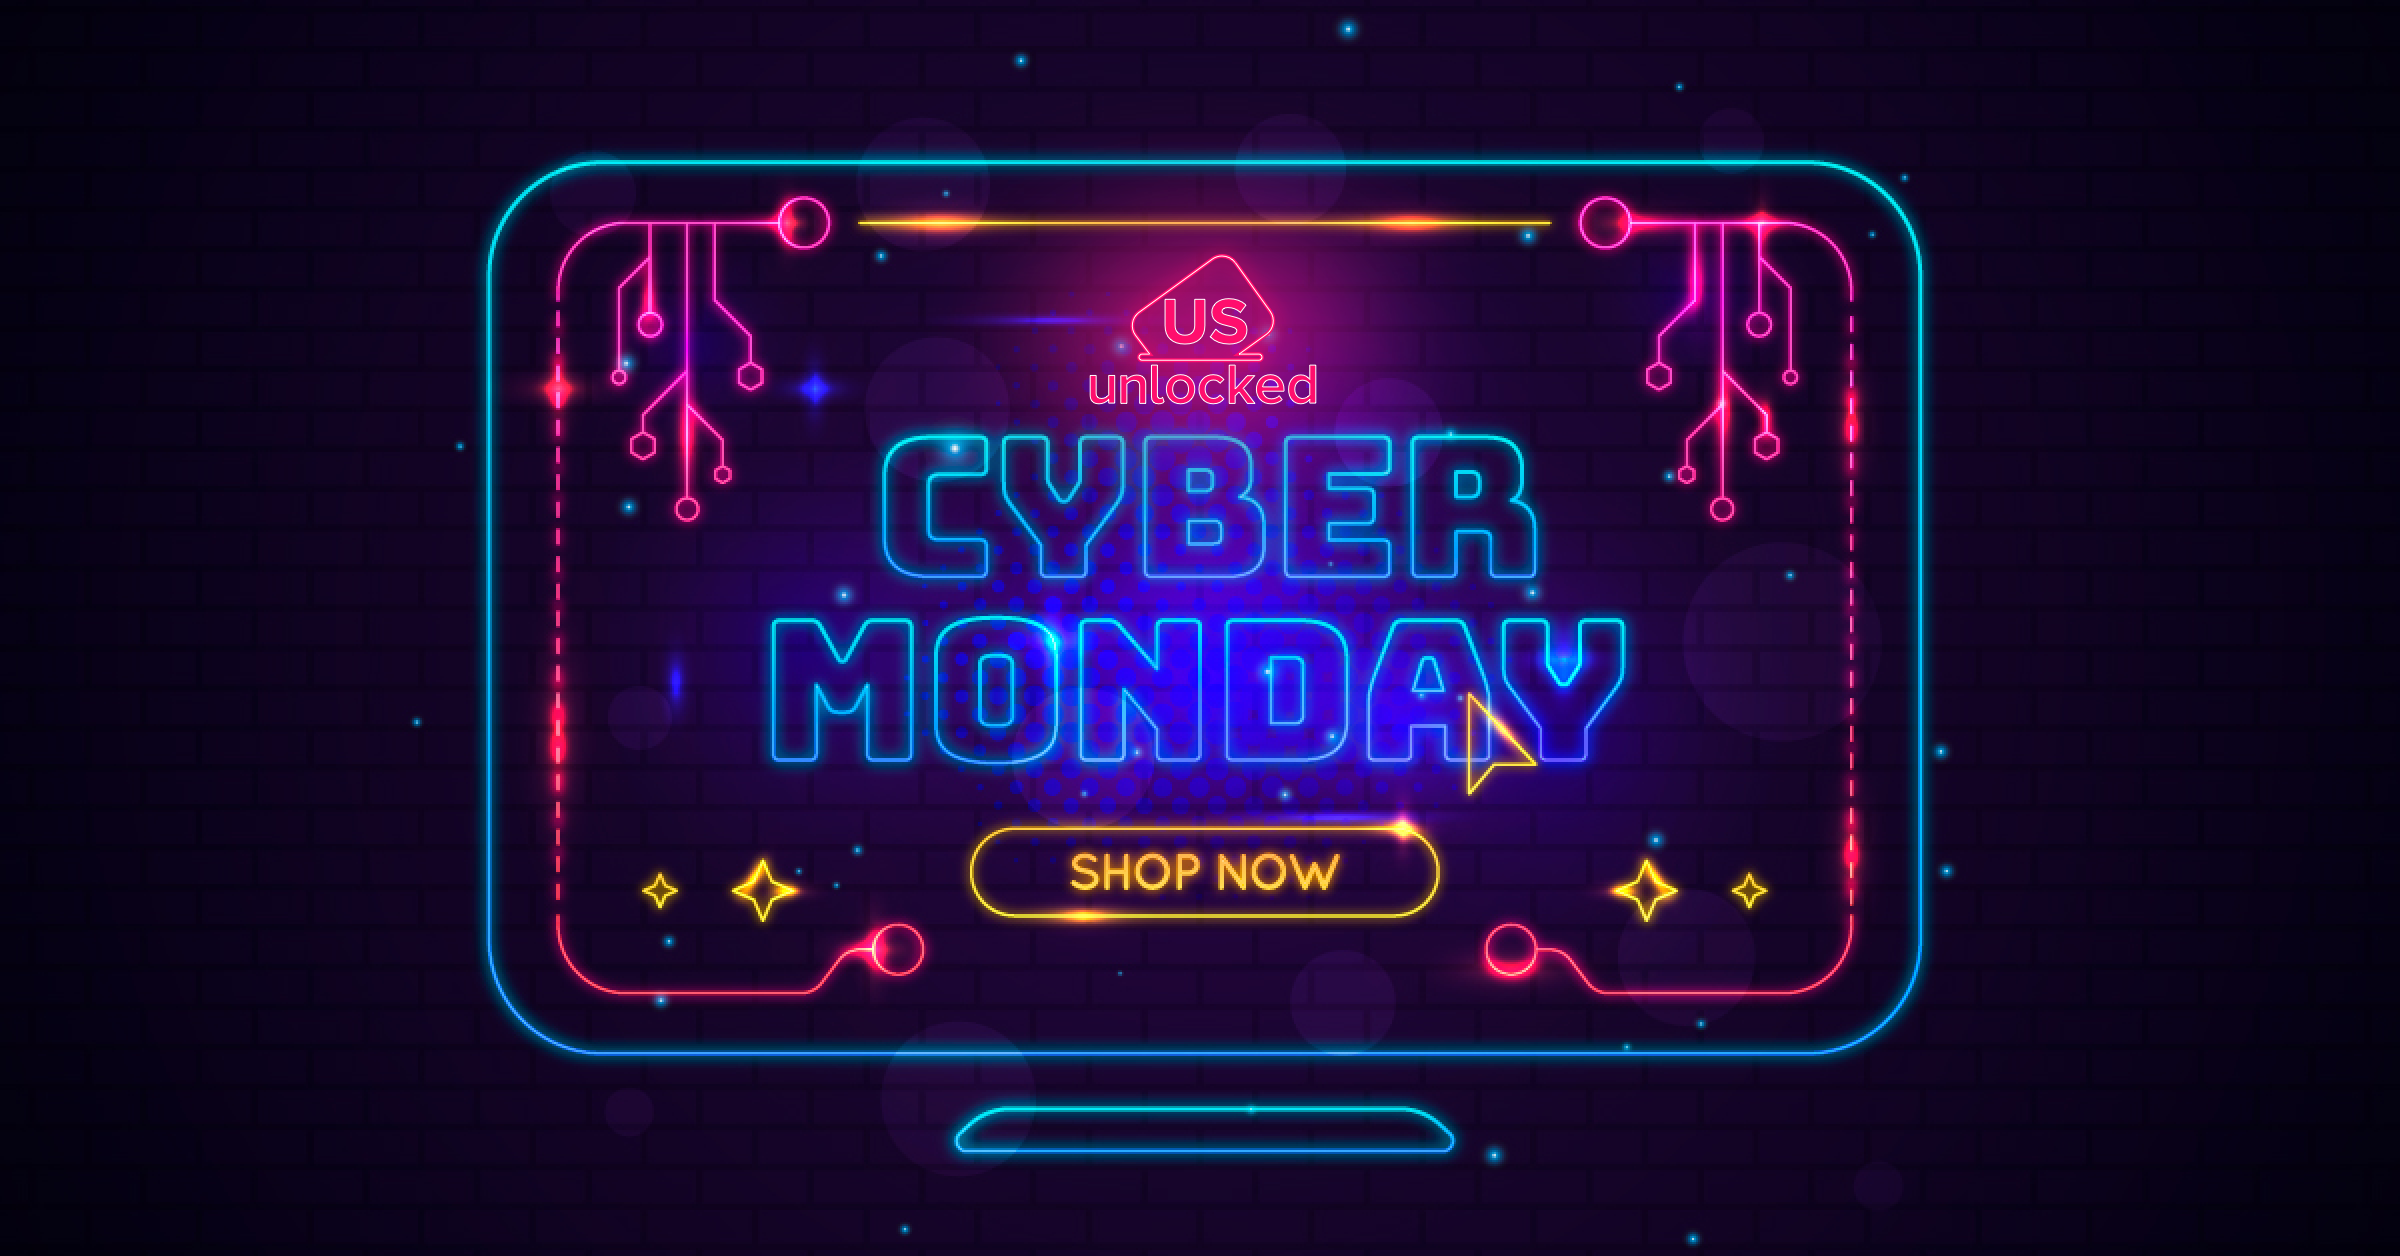 Cyber Monday is Here!